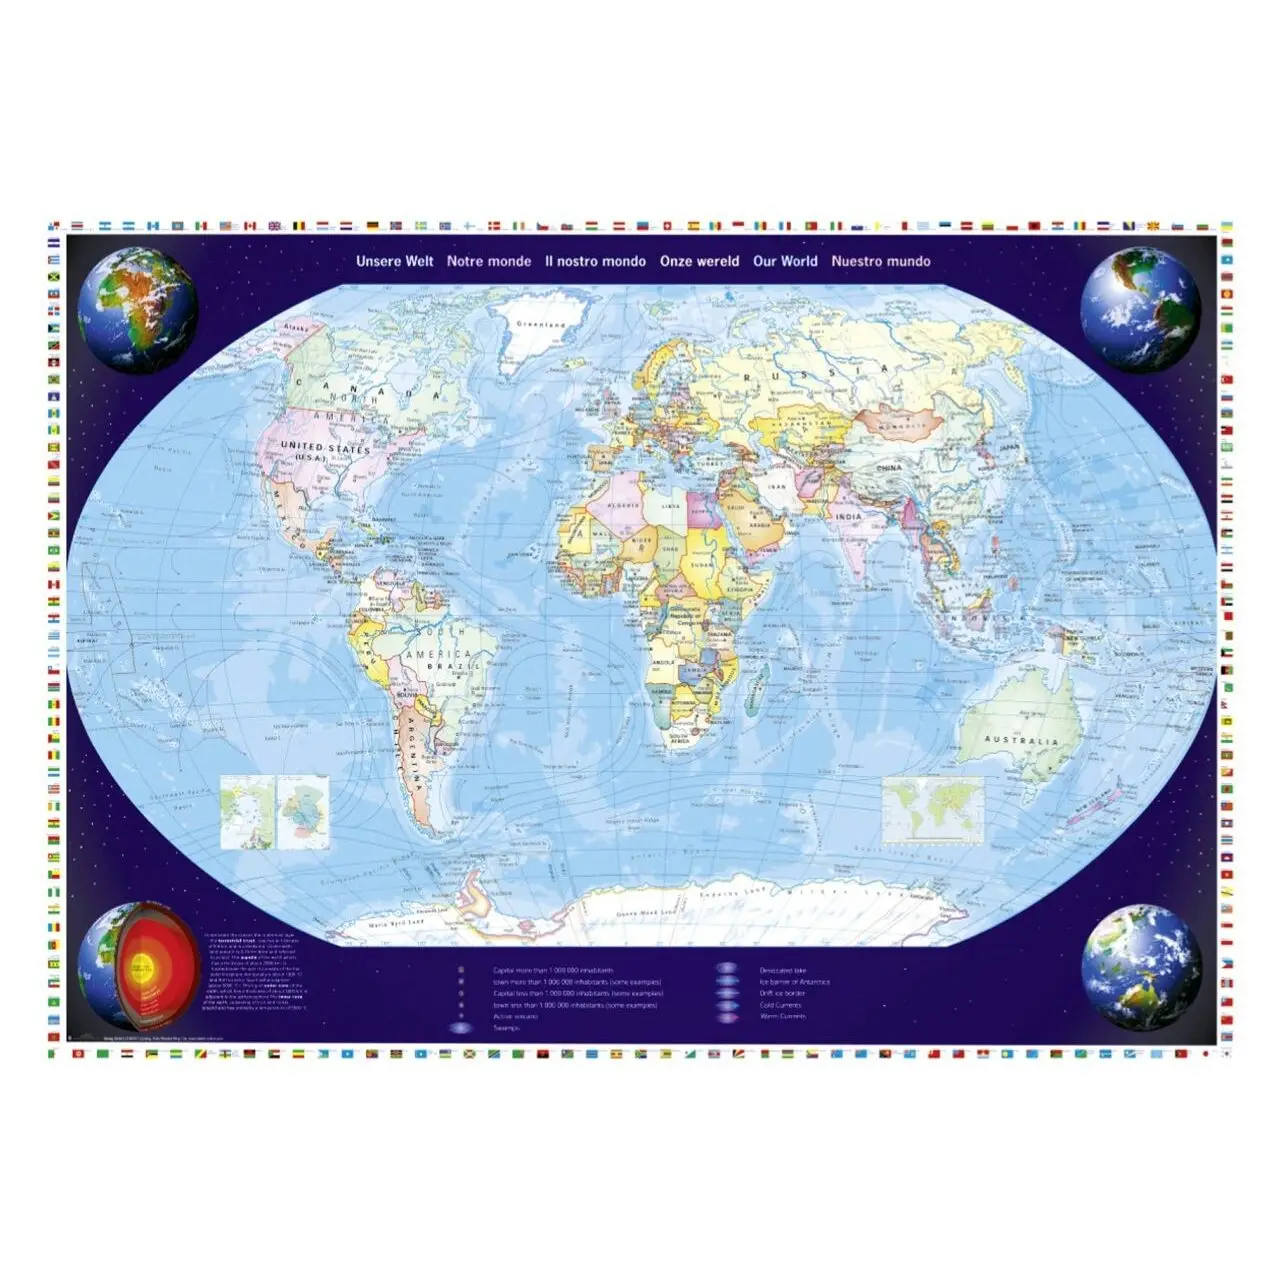 Unsere Welt 2000 Puzzle Teile